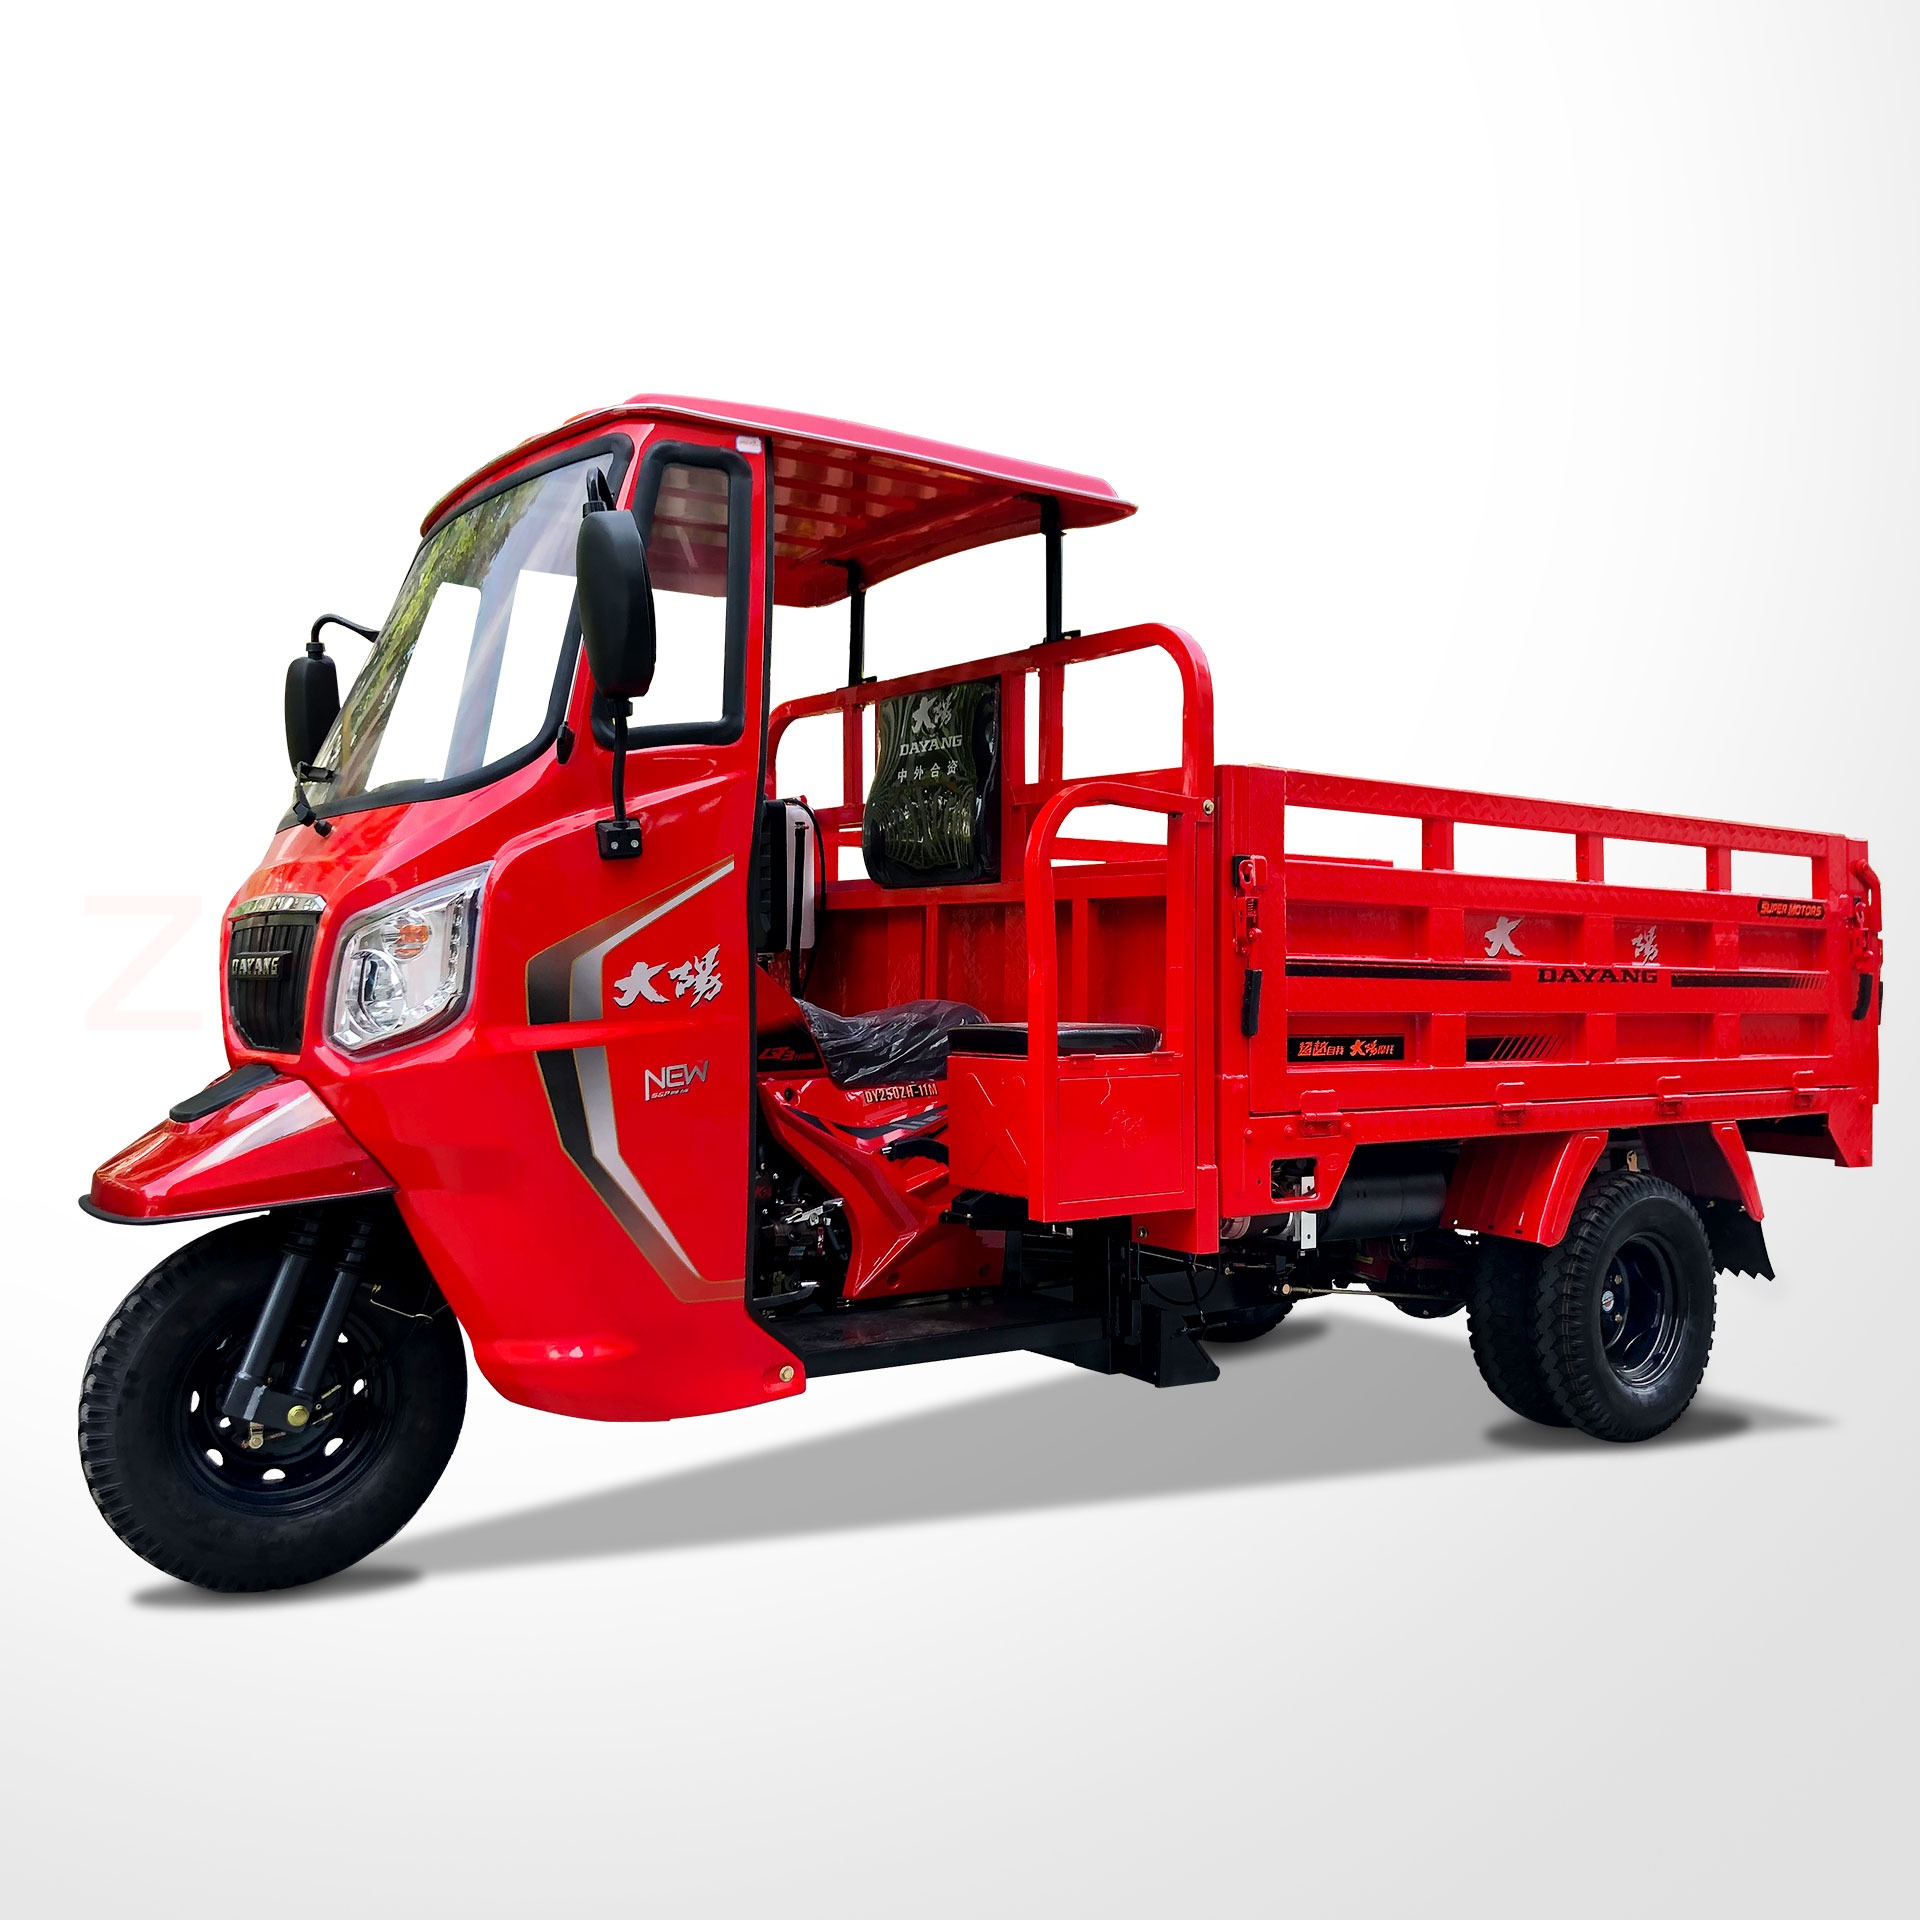 Big carriage fuel domestic and agricultural harga cabin motor tricycle motorized tricycles strong